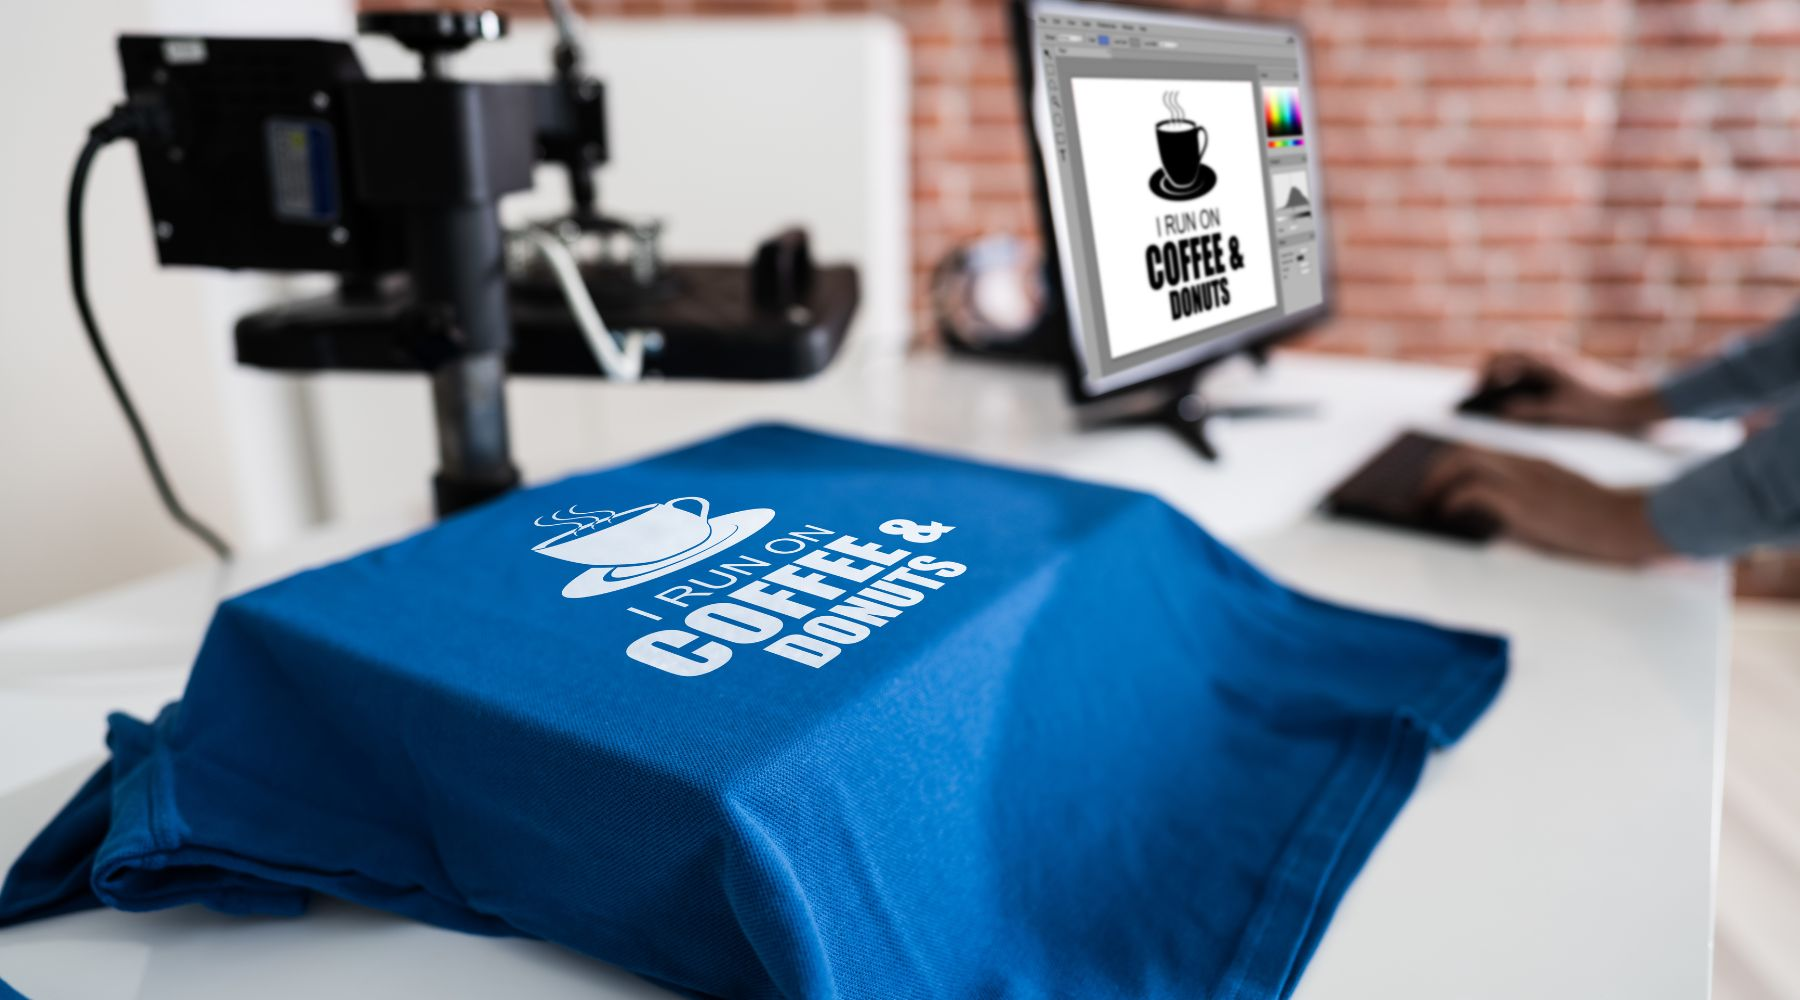 Graphic design process with a blue T-shirt reading 'I run on coffee and donuts' next to a matching screen design on a computer.